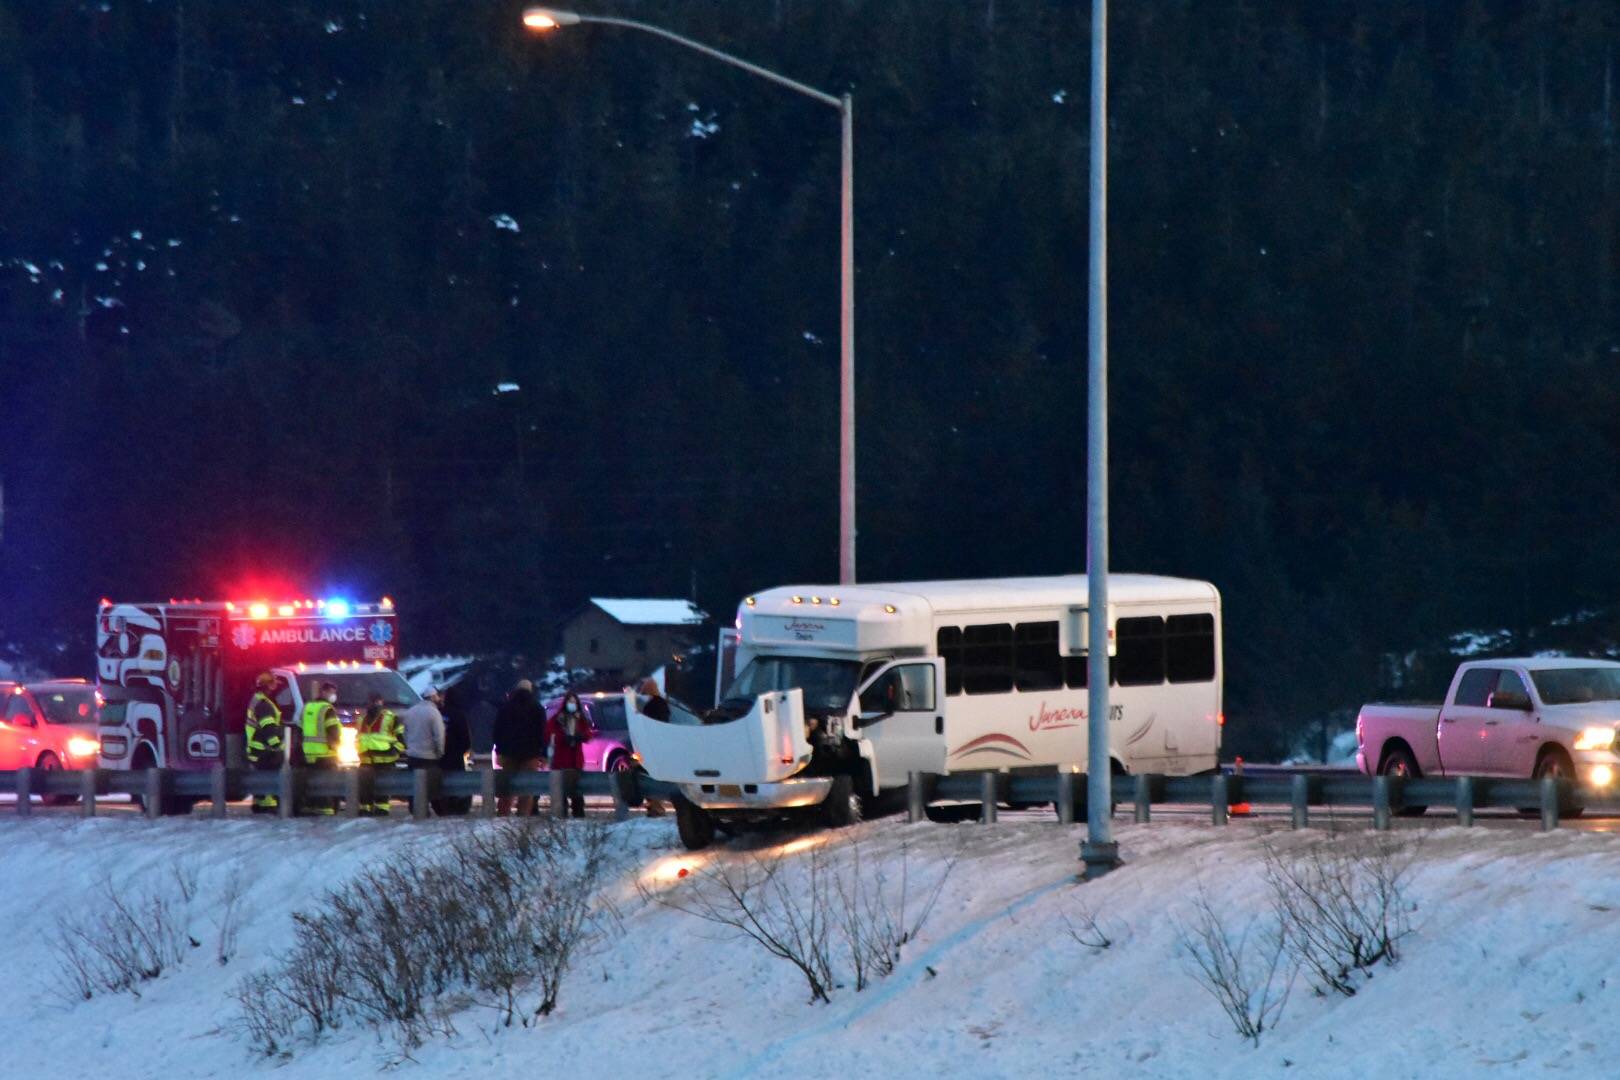 A City and Borough of Juneau minibus crashed into a guardrail on Egan Drive near Twin Lakes for reasons unknown on Feb. 15, 2021. (Peter Segall / Juneau Empire)